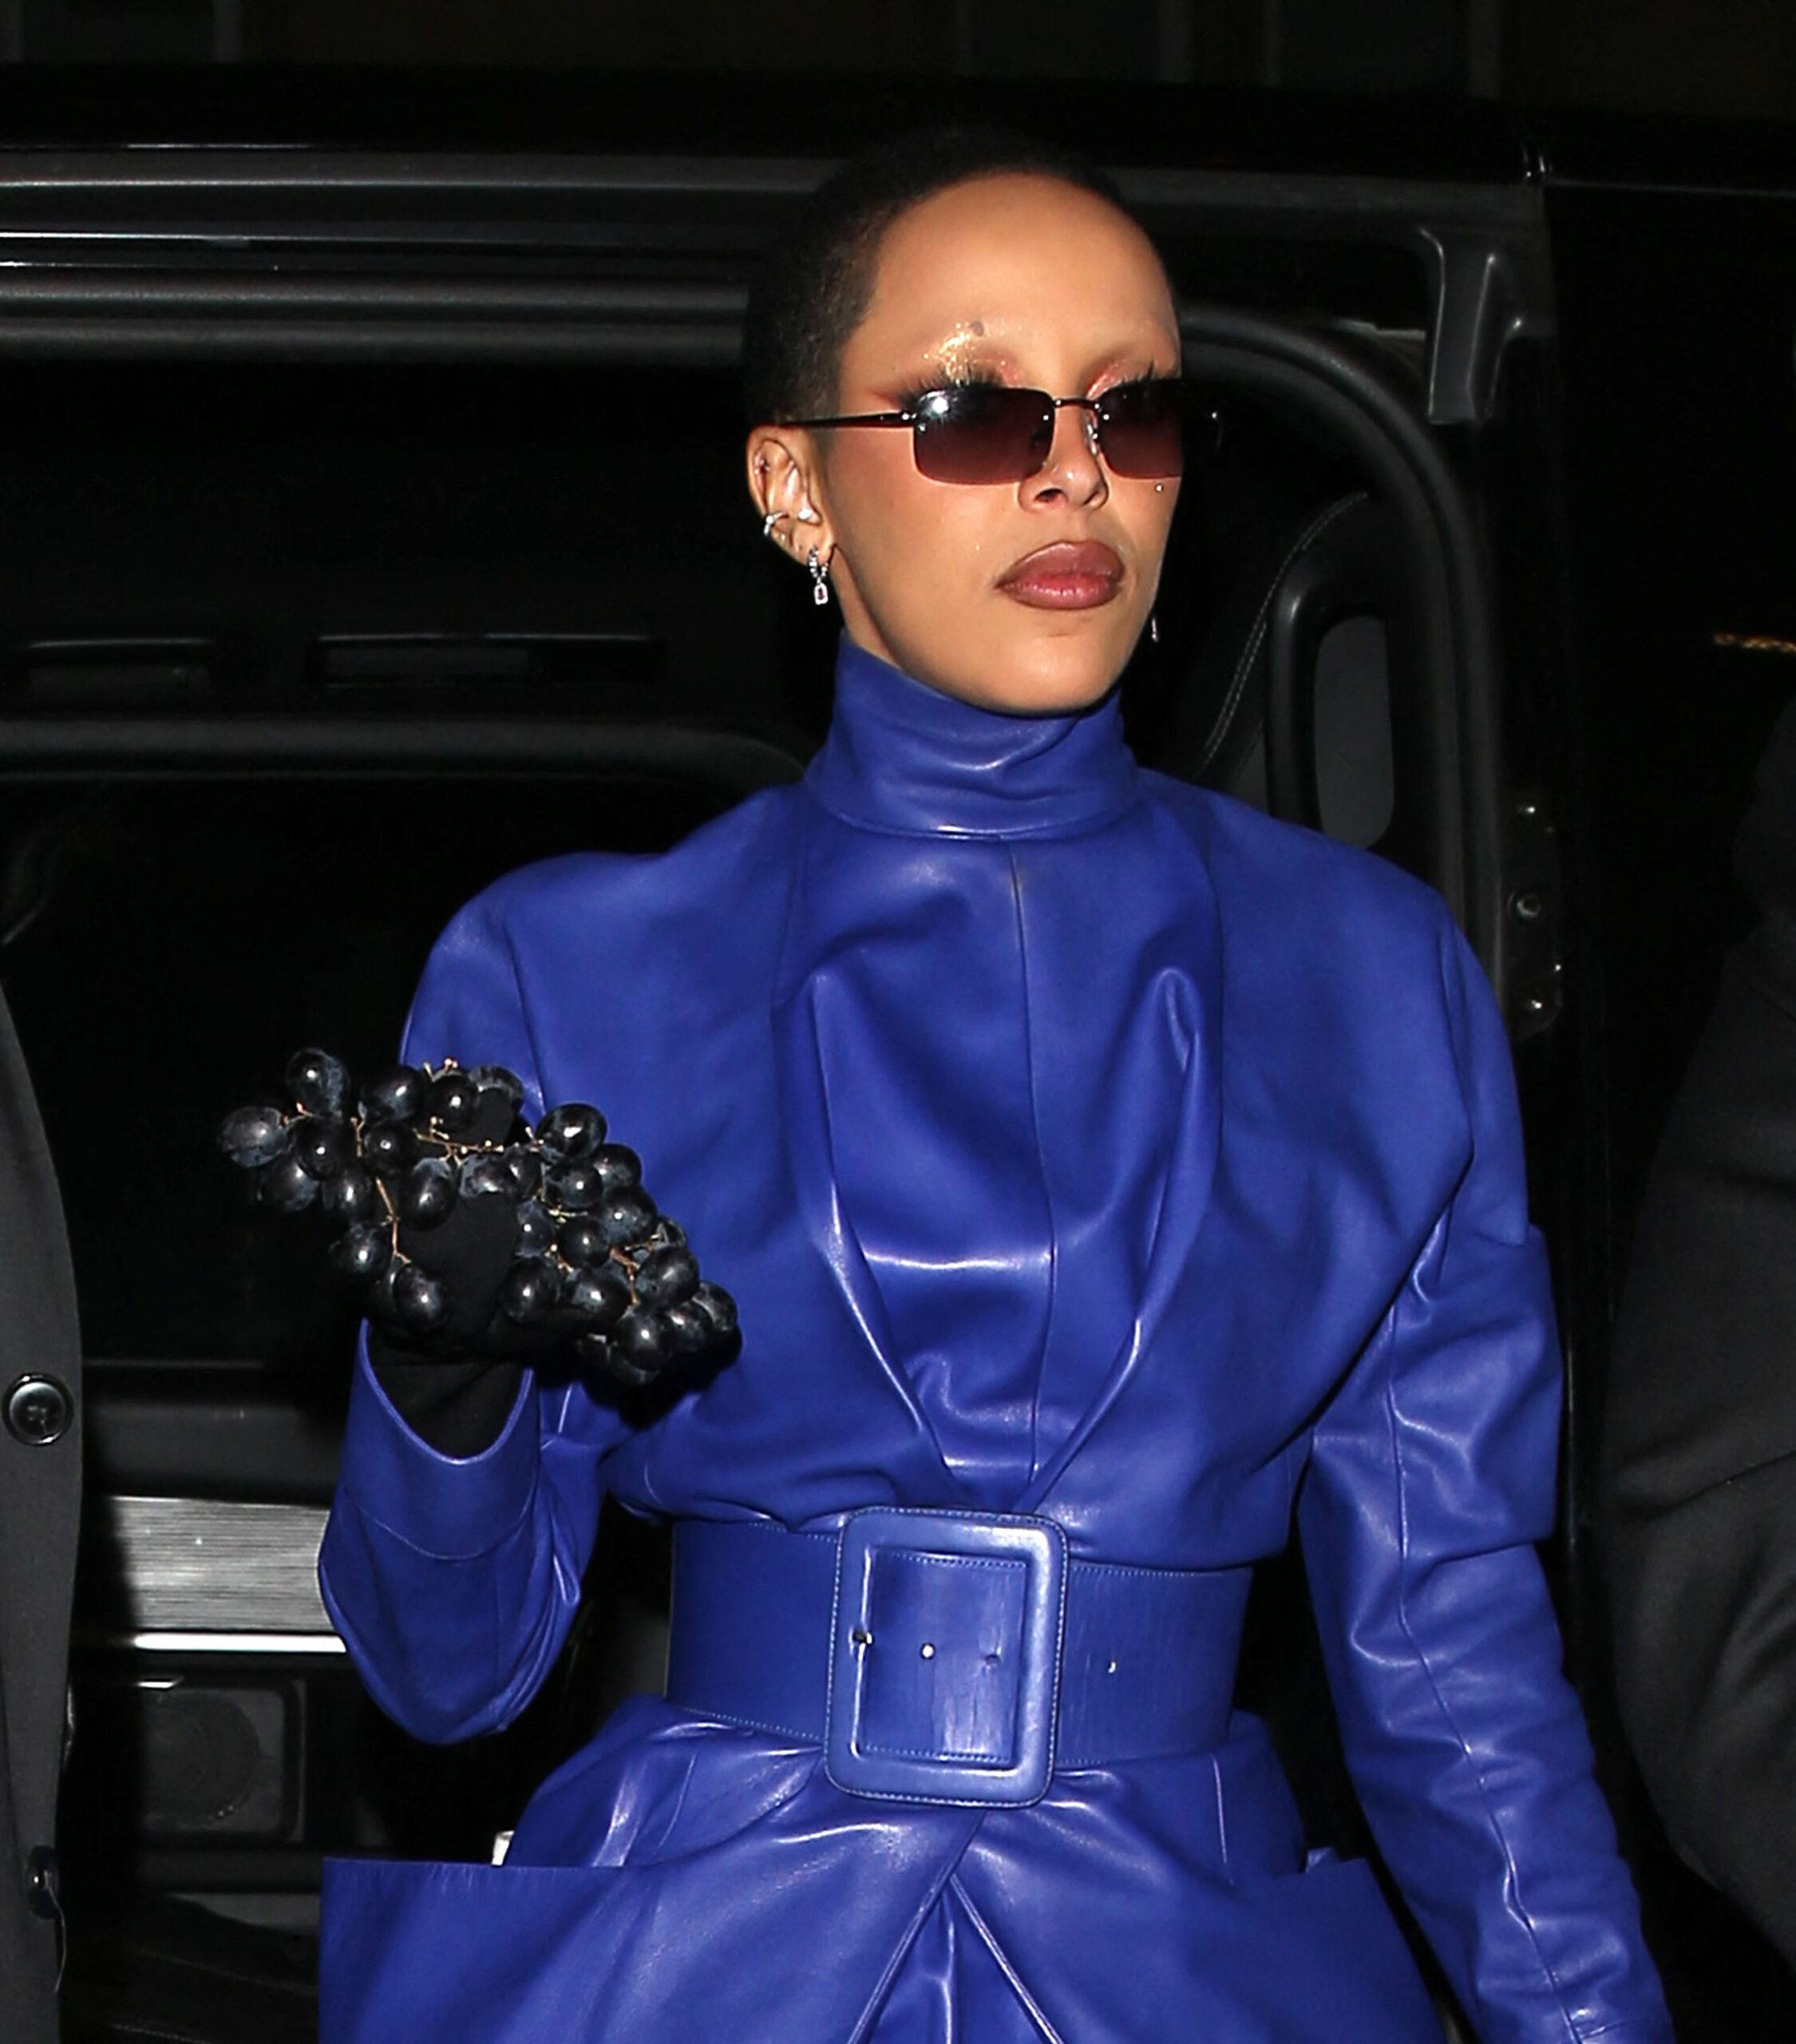 Doja cat wears a Blue leather outfit with a bunch of Dark Colored Grapes in her hand at Jean Paul Gaultier in Paris